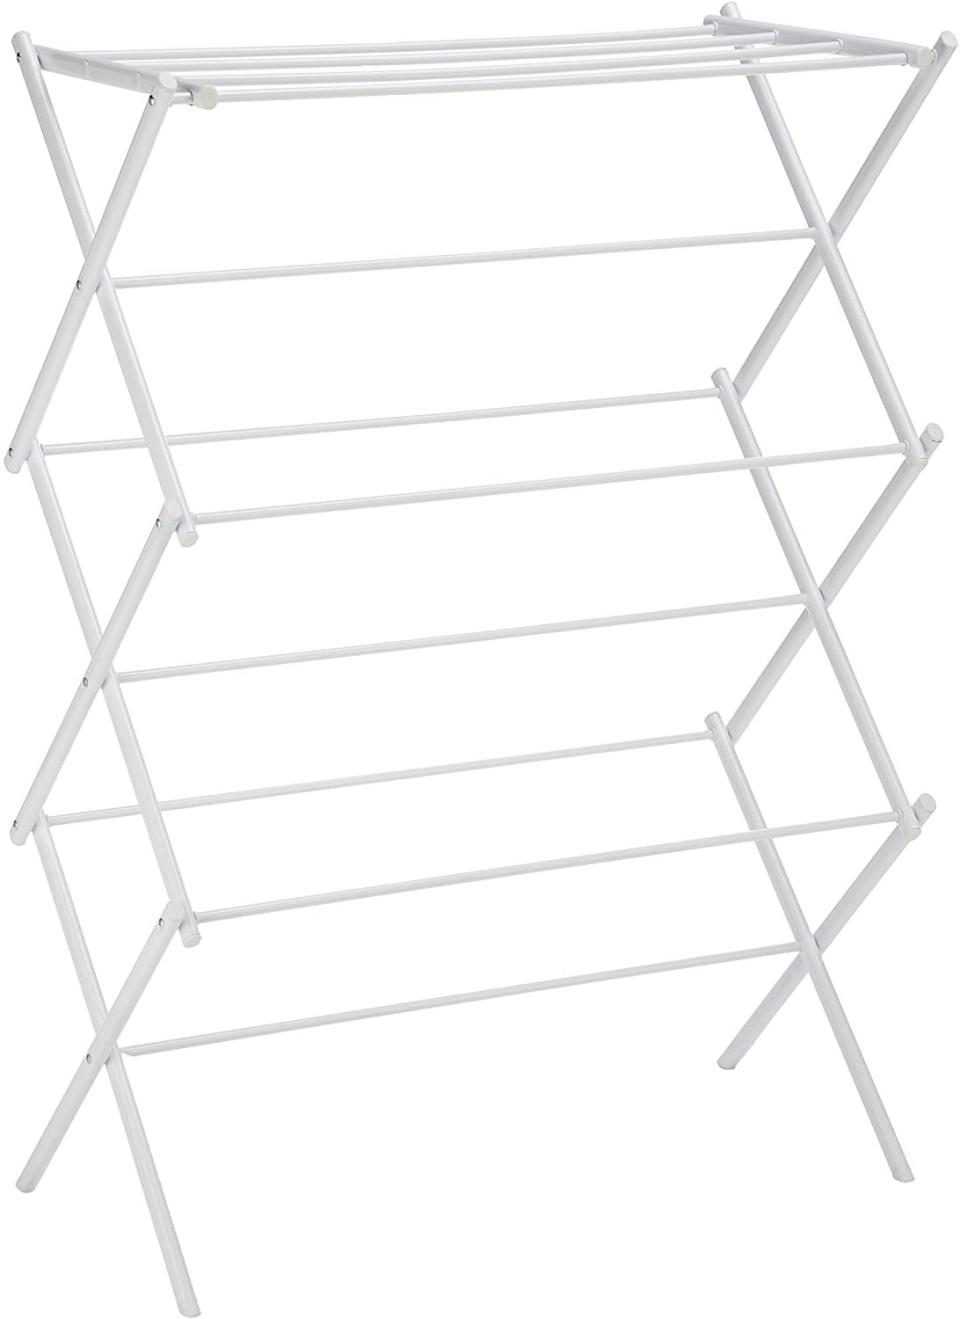 Foldable Clothes Drying Rack from Amazon